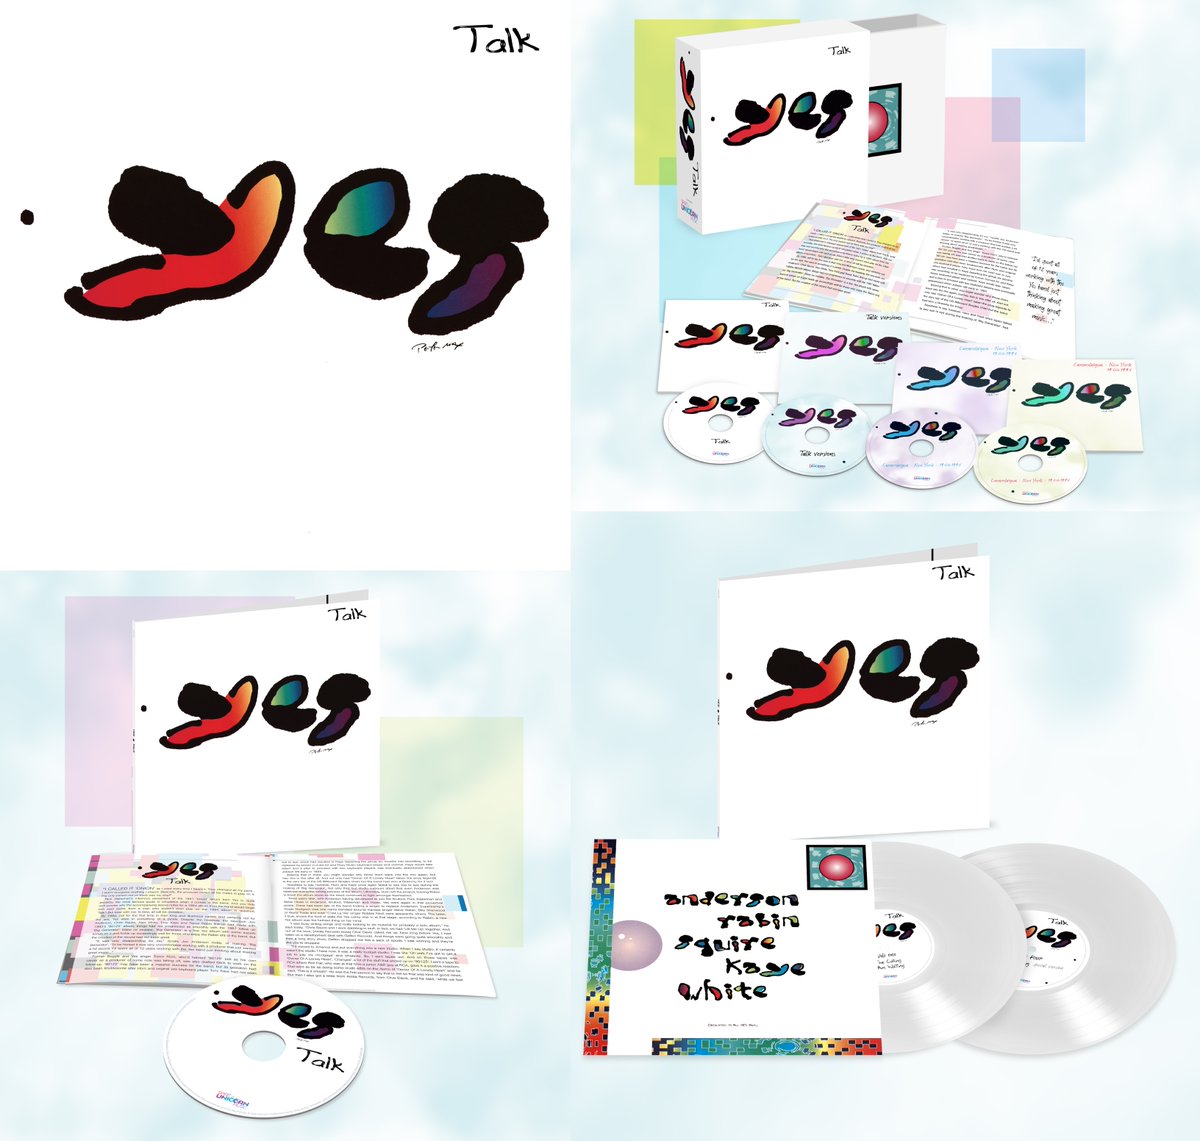 Yes - Talk (30th Anniversary) To commemorate its 30th anniversary, the album is being reissued in various formats with a superb Andy Pearce remaster and sleeve notes by Jerry Ewing Preorder now from the @YesOfficial store: burningshed.com/tag/Talk_30th_…